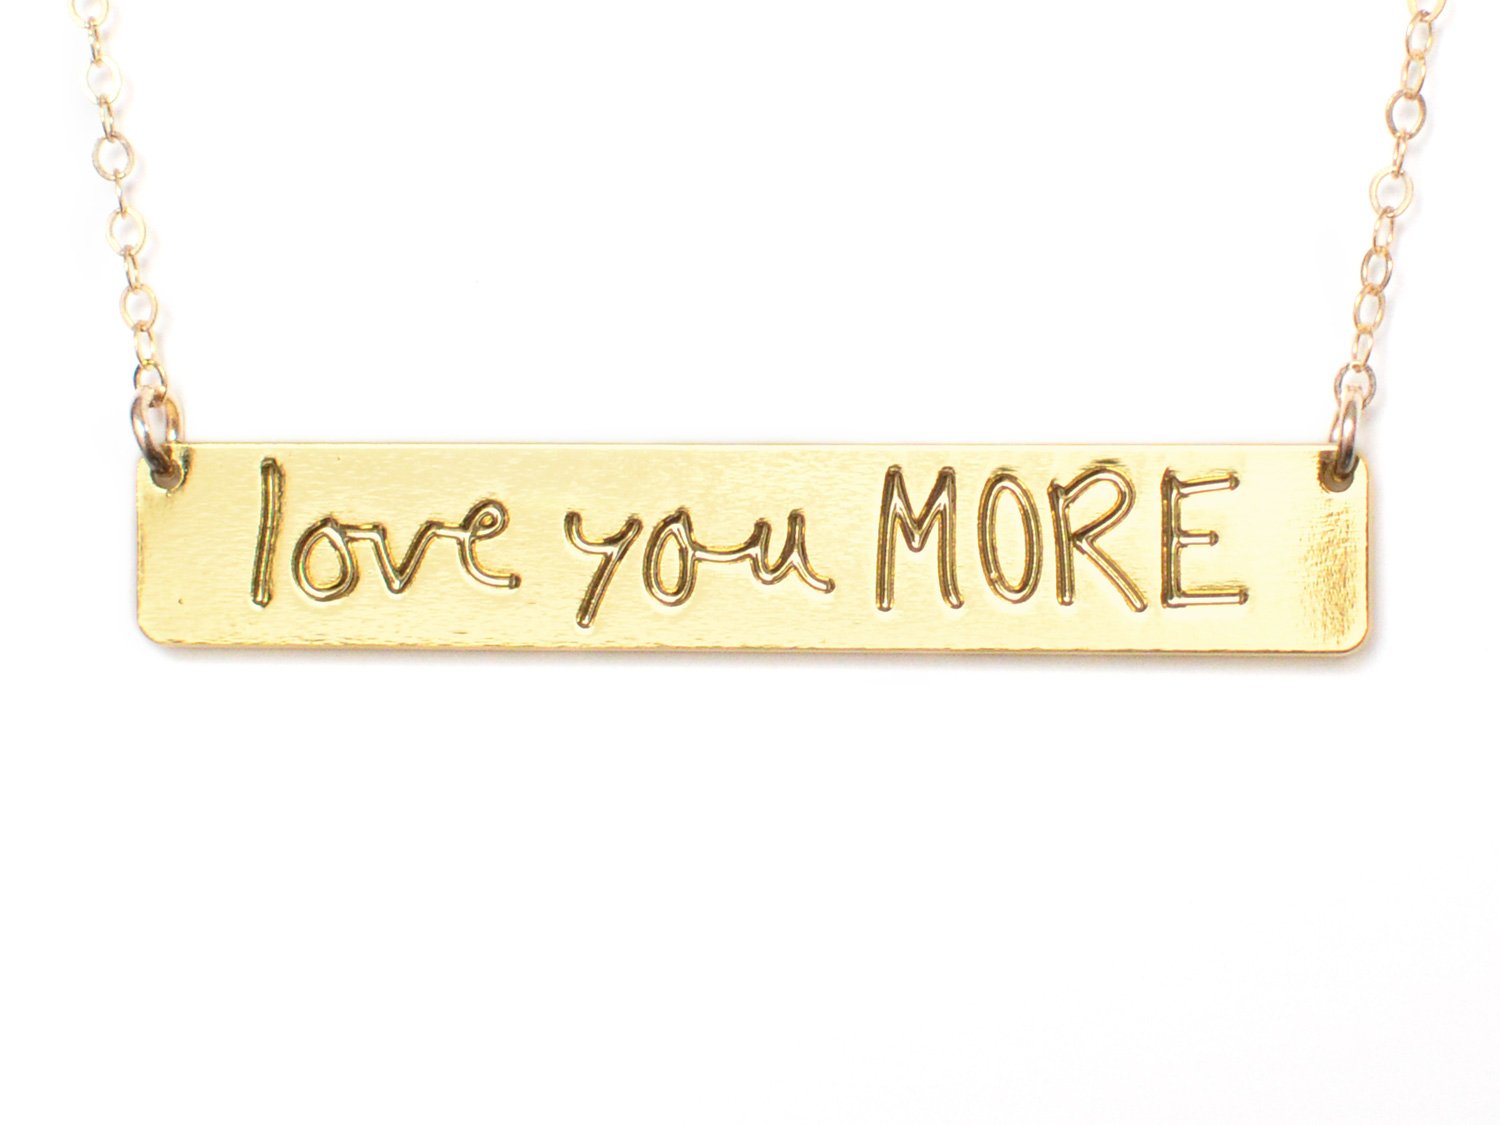 Love You More Bar Necklace - High Quality, Affordable, Hand Written, Empowering, Self Love, Mantra Word Necklace - Available in Gold and Silver - Made in USA - Brevity Jewelry